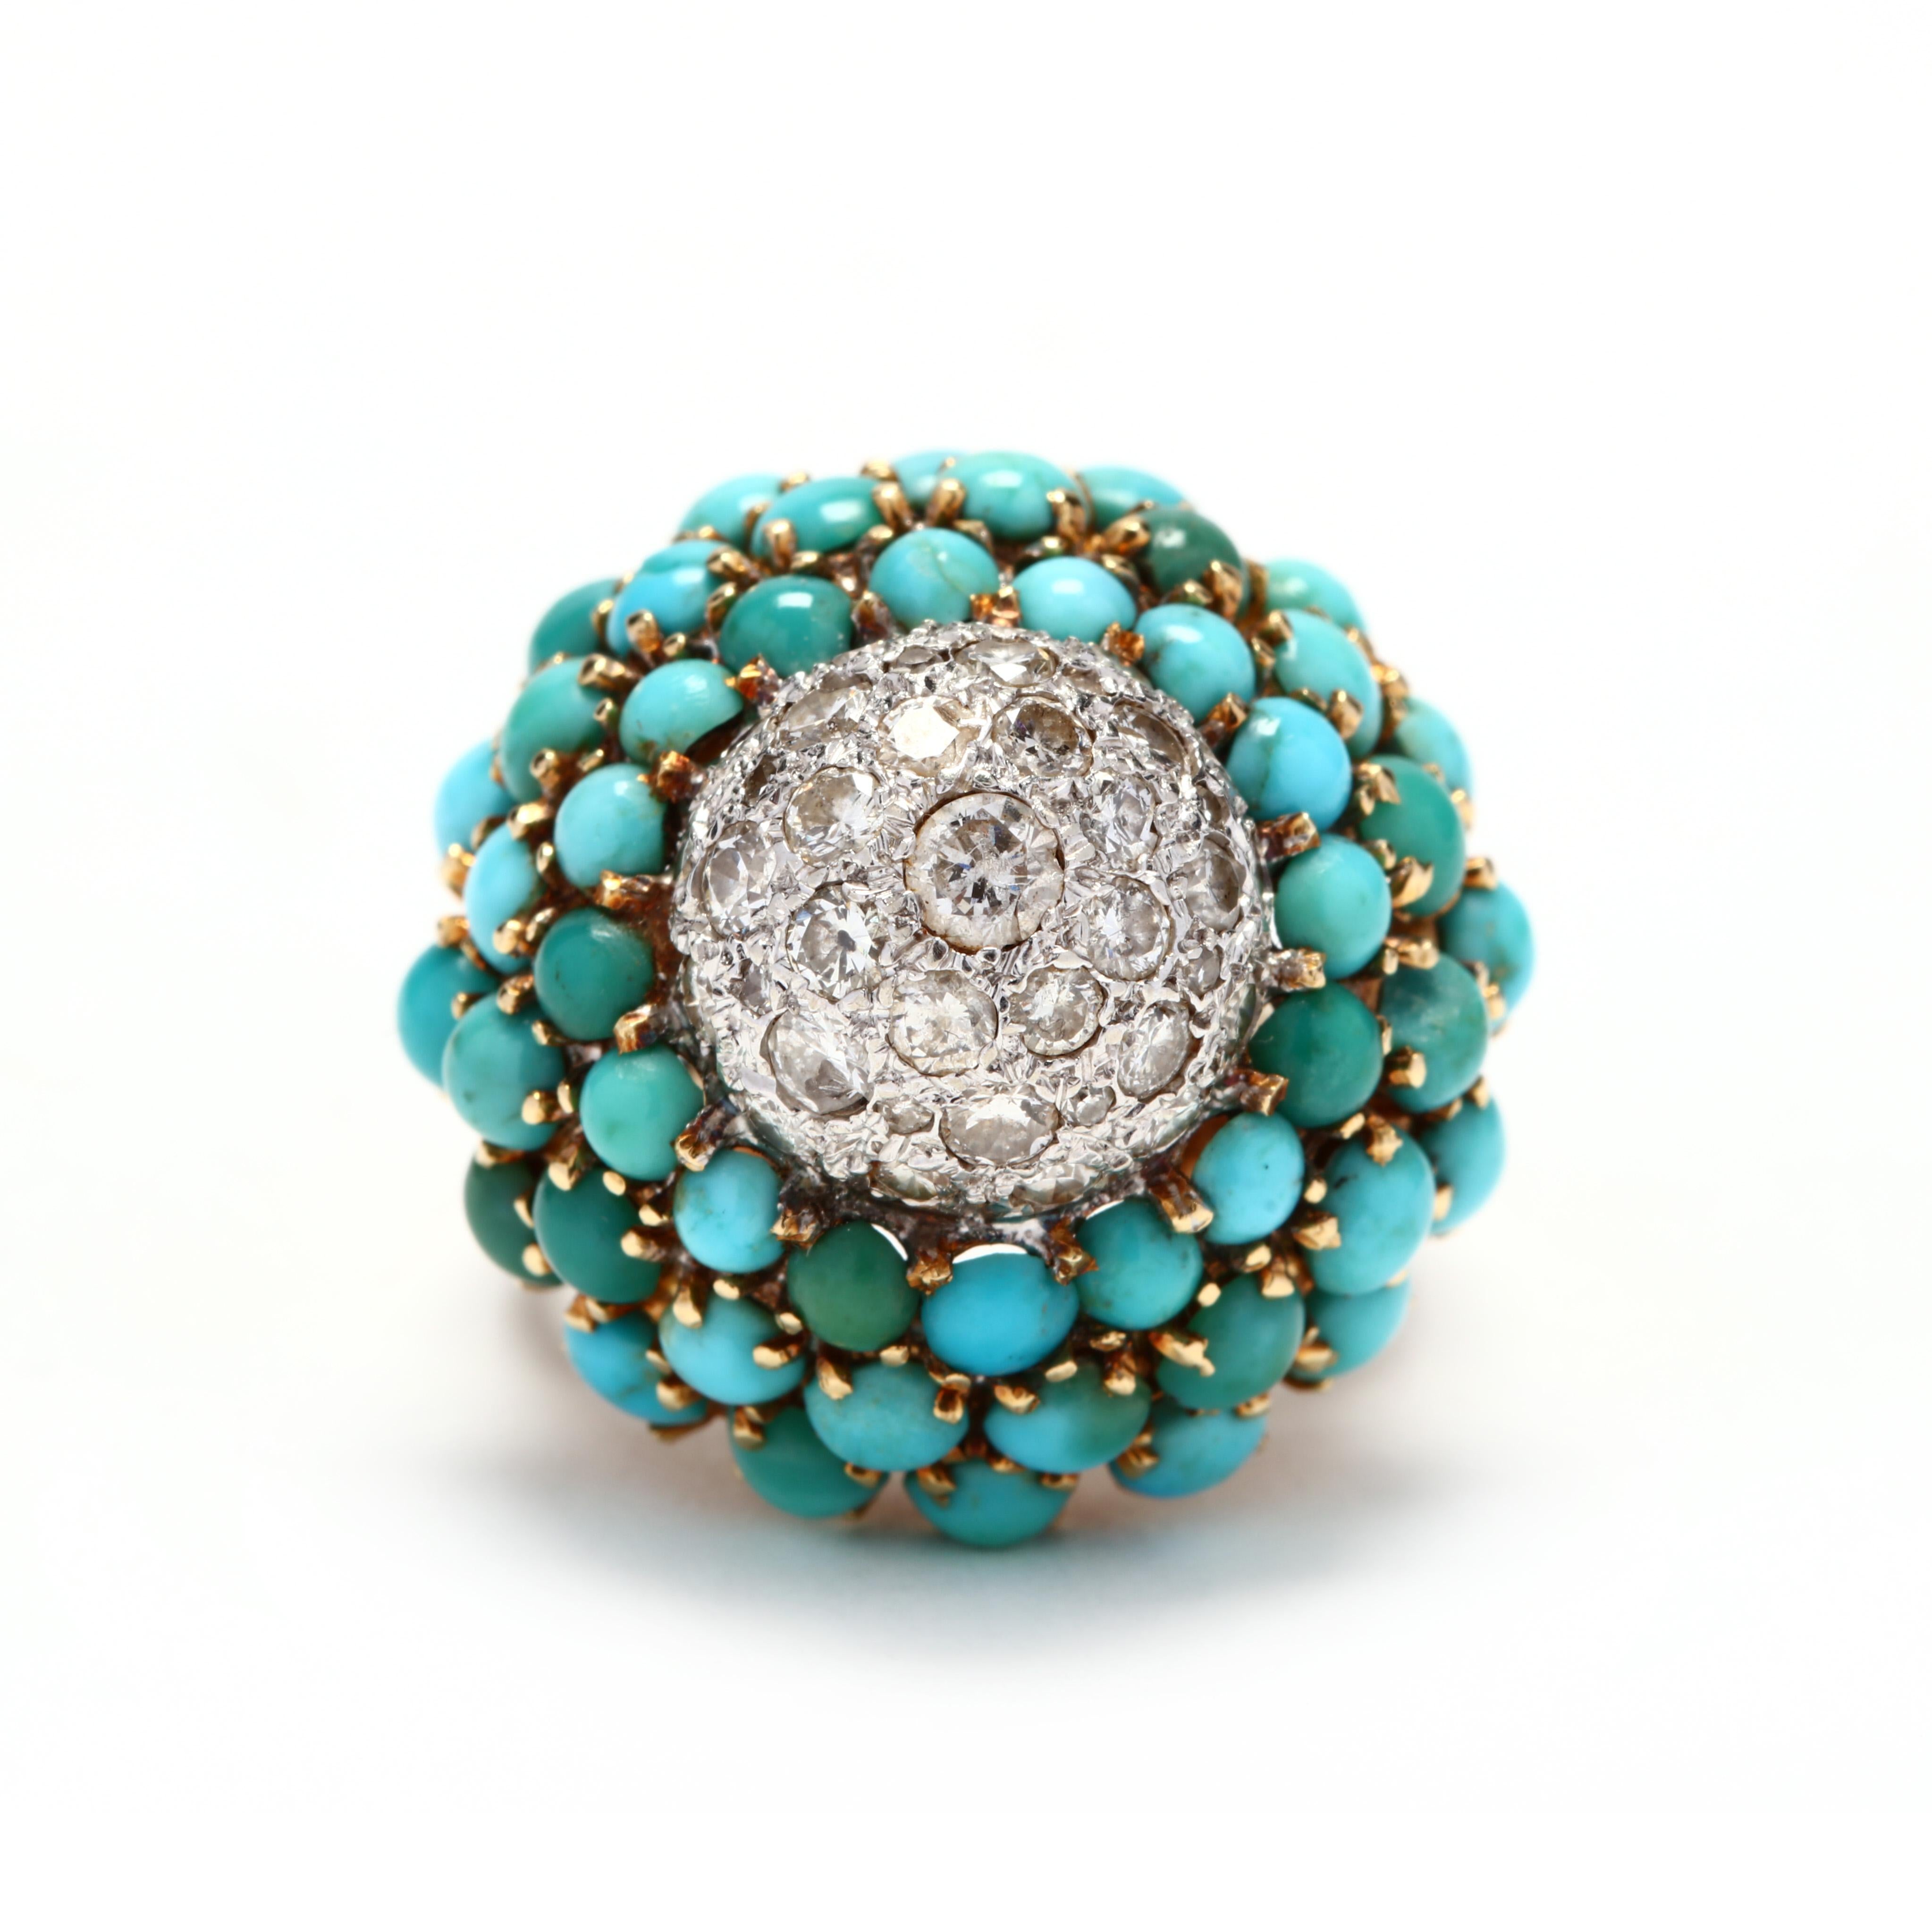 A retro bombe ring with a platinum dome set with full cut round diamonds surrounded by rows of prong set, round cabochon turquoise stones and with a triple shank.

Stones:
- turquoise
- round cabochon, 49 stones
- 2.75-3.5 mm 

- diamonds
- full cut